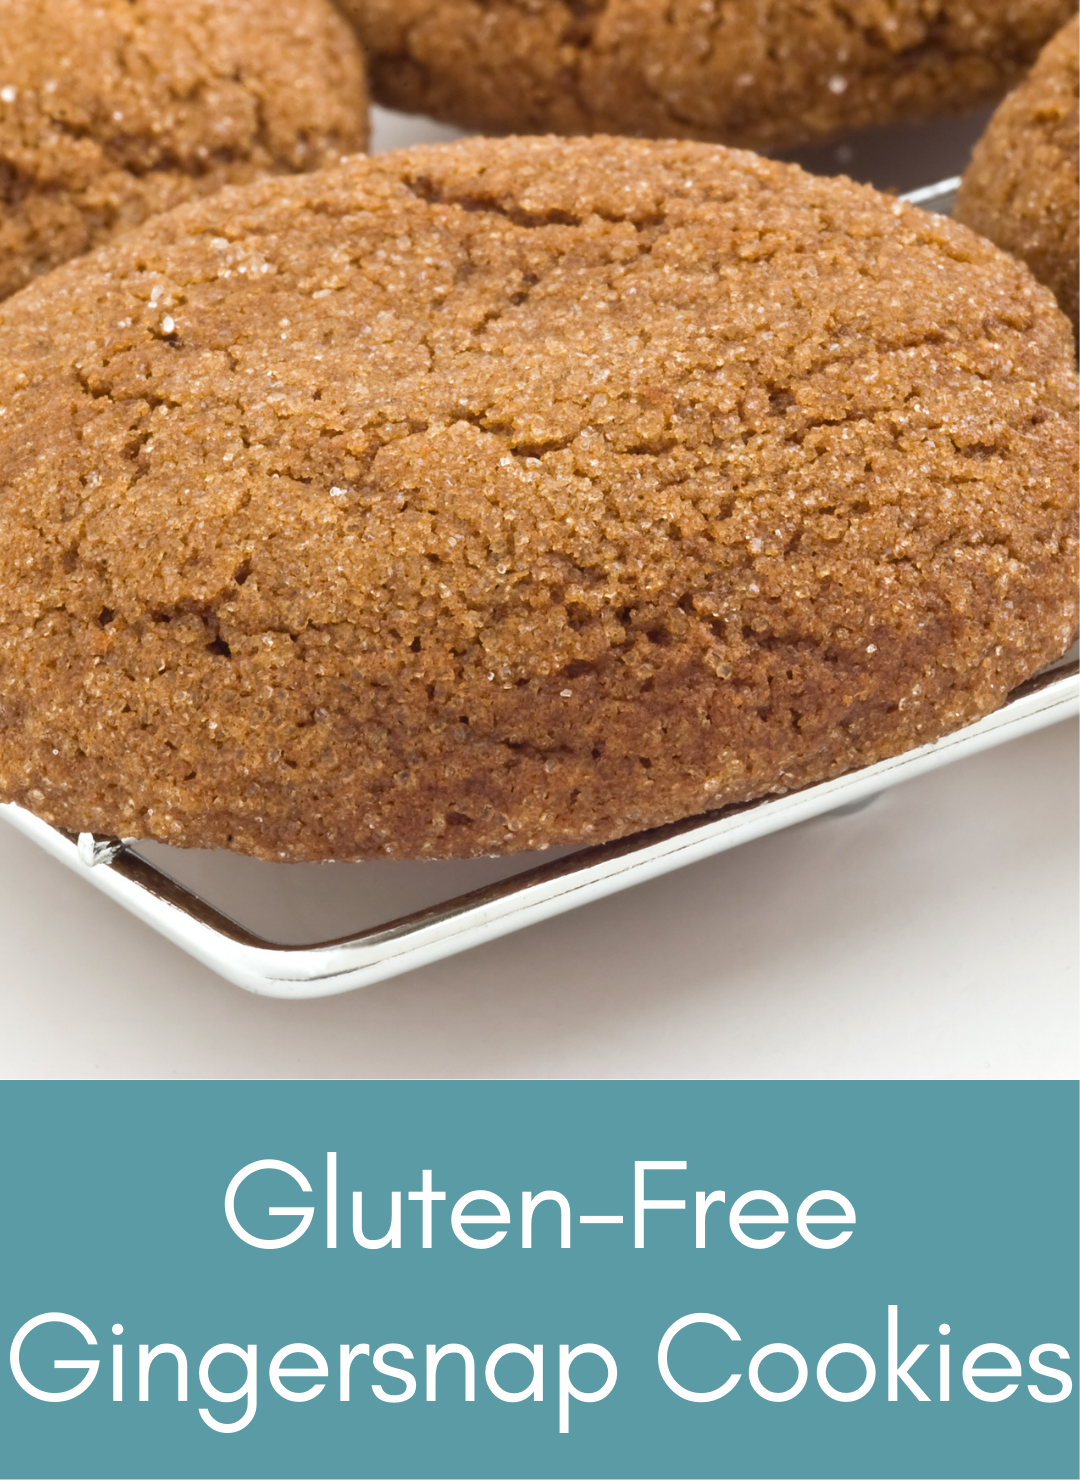 Whole food plant based gluten-free gingersnap cookies Picture with link to recipe